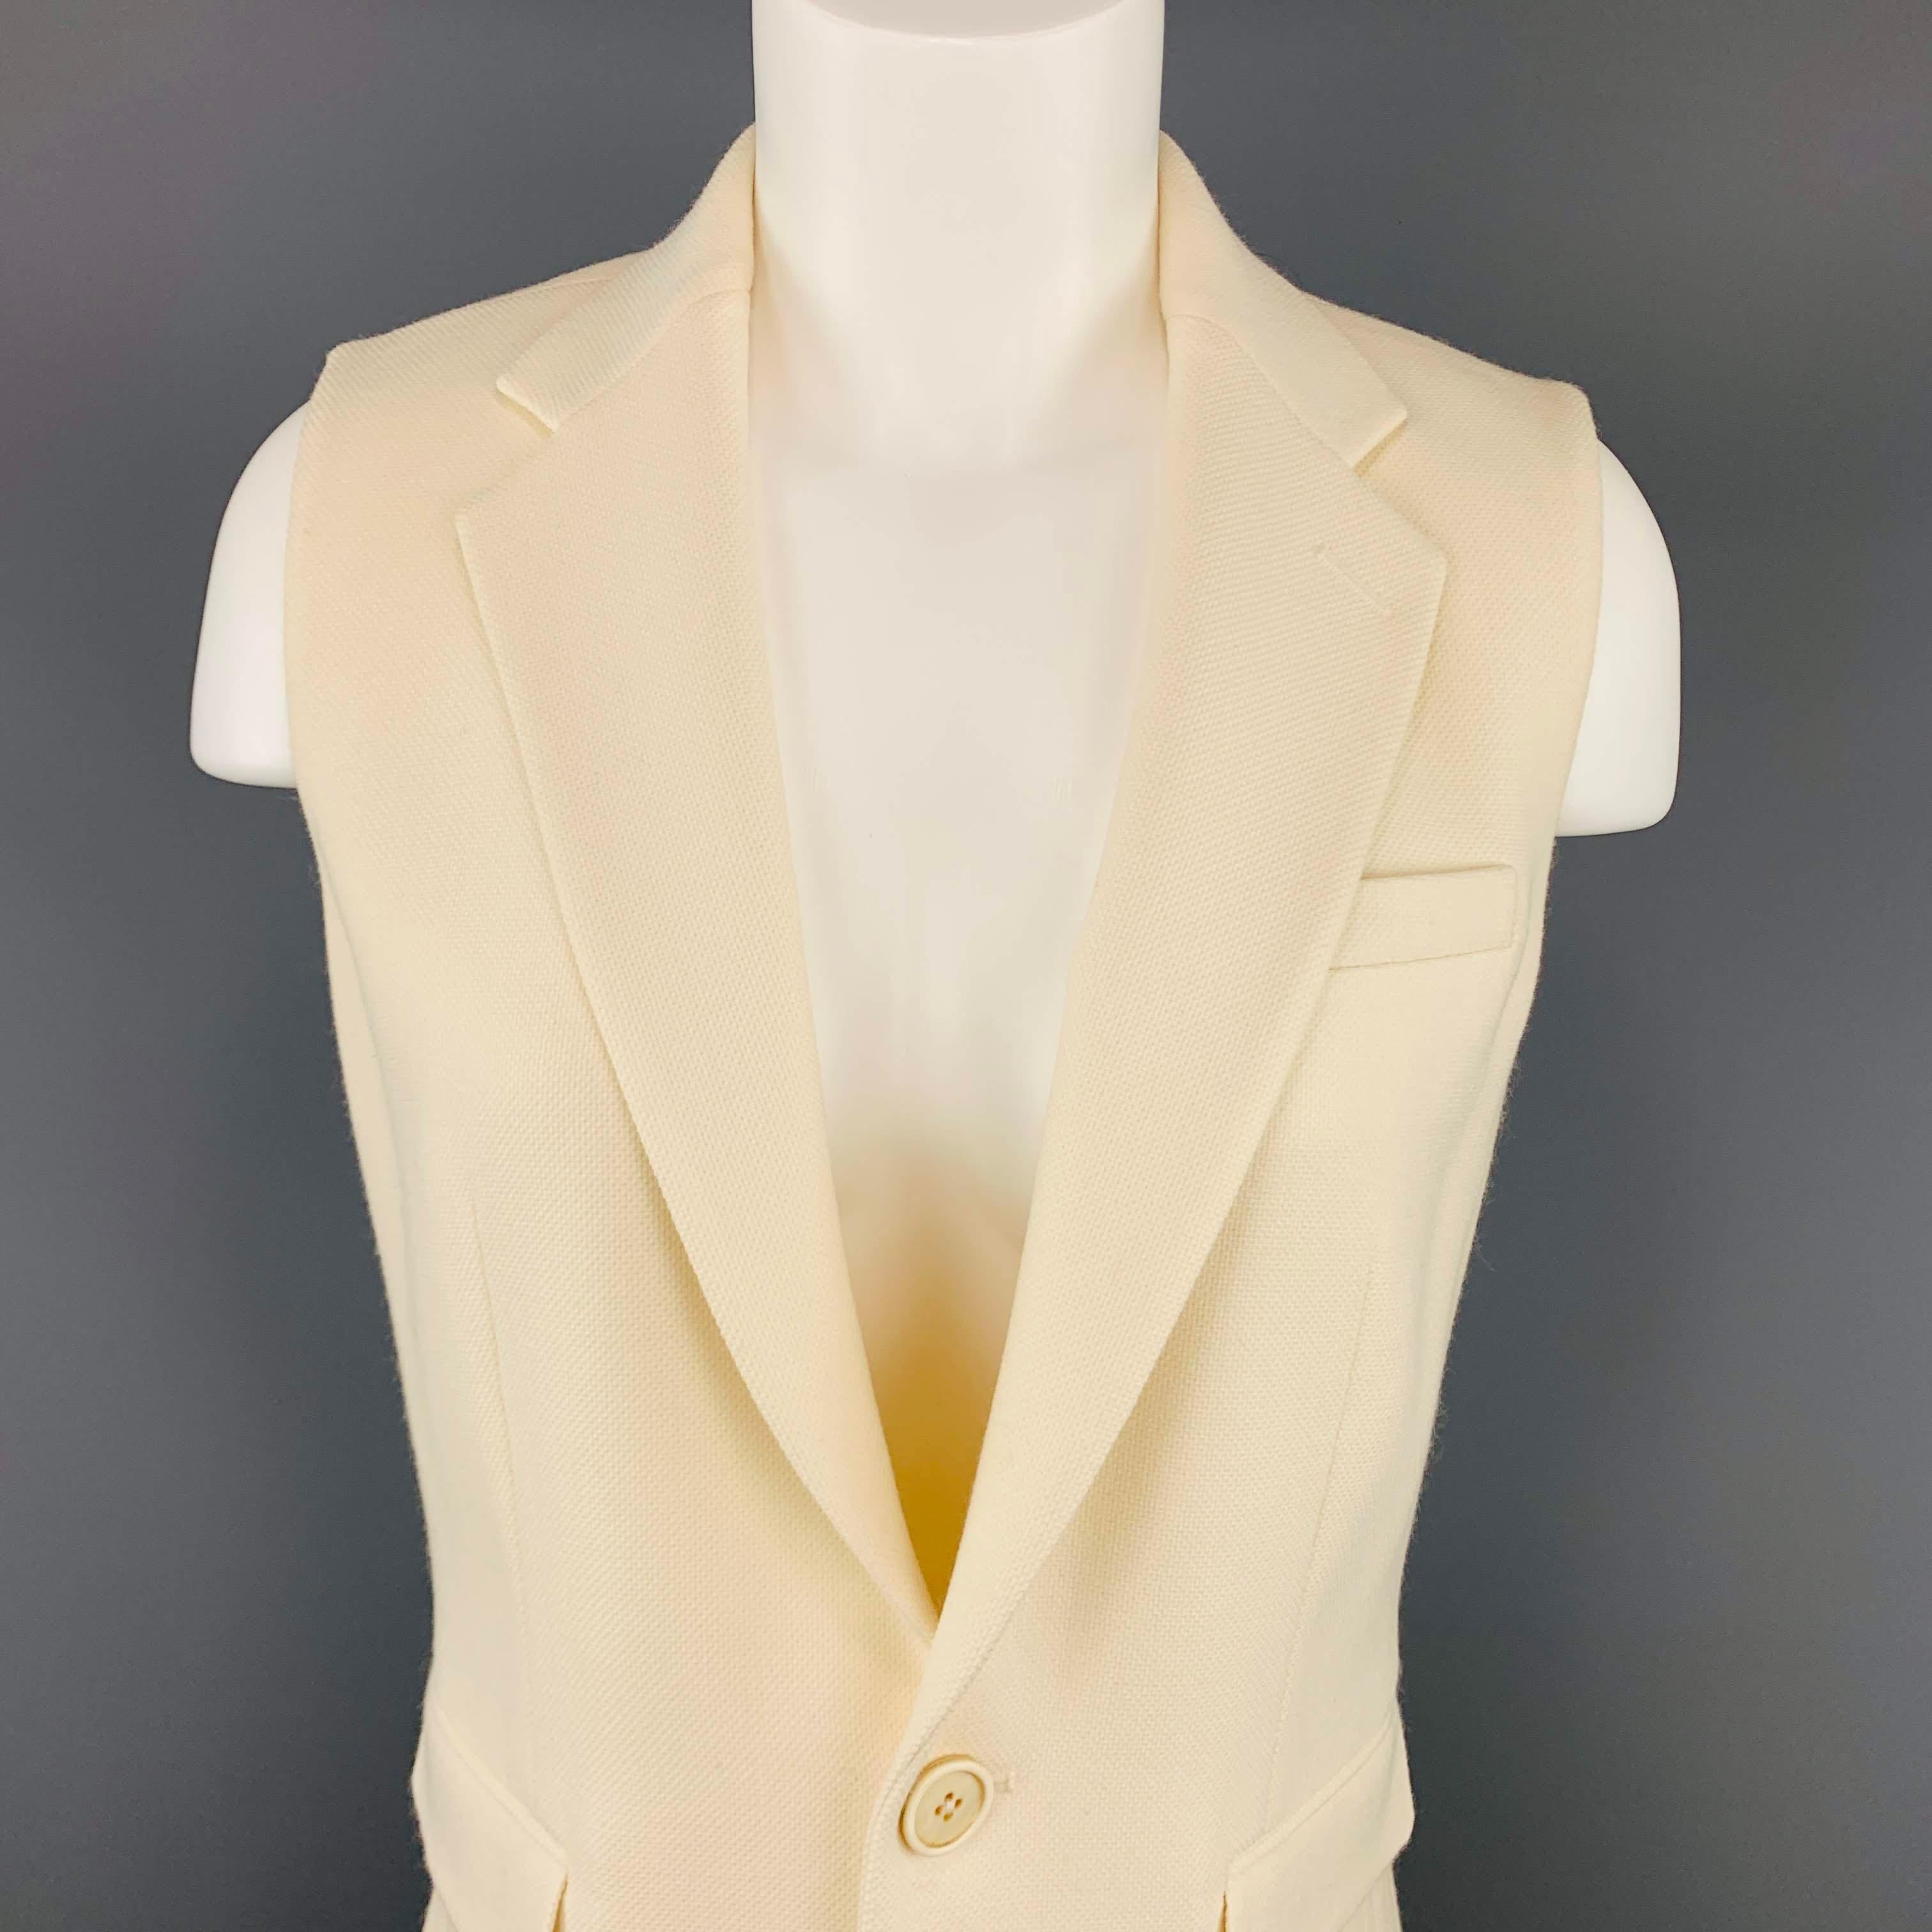 RALPH LAUREN COLLECTION sleeveless sport coat vest jacket comes in creamy beige textured wool with a notch lapel and single breasted two button closure. Made in USA.
Excellent Pre-Owned Condition.
 

Marked:   6
 

Measurements: 
  
lShoulder: 13.5